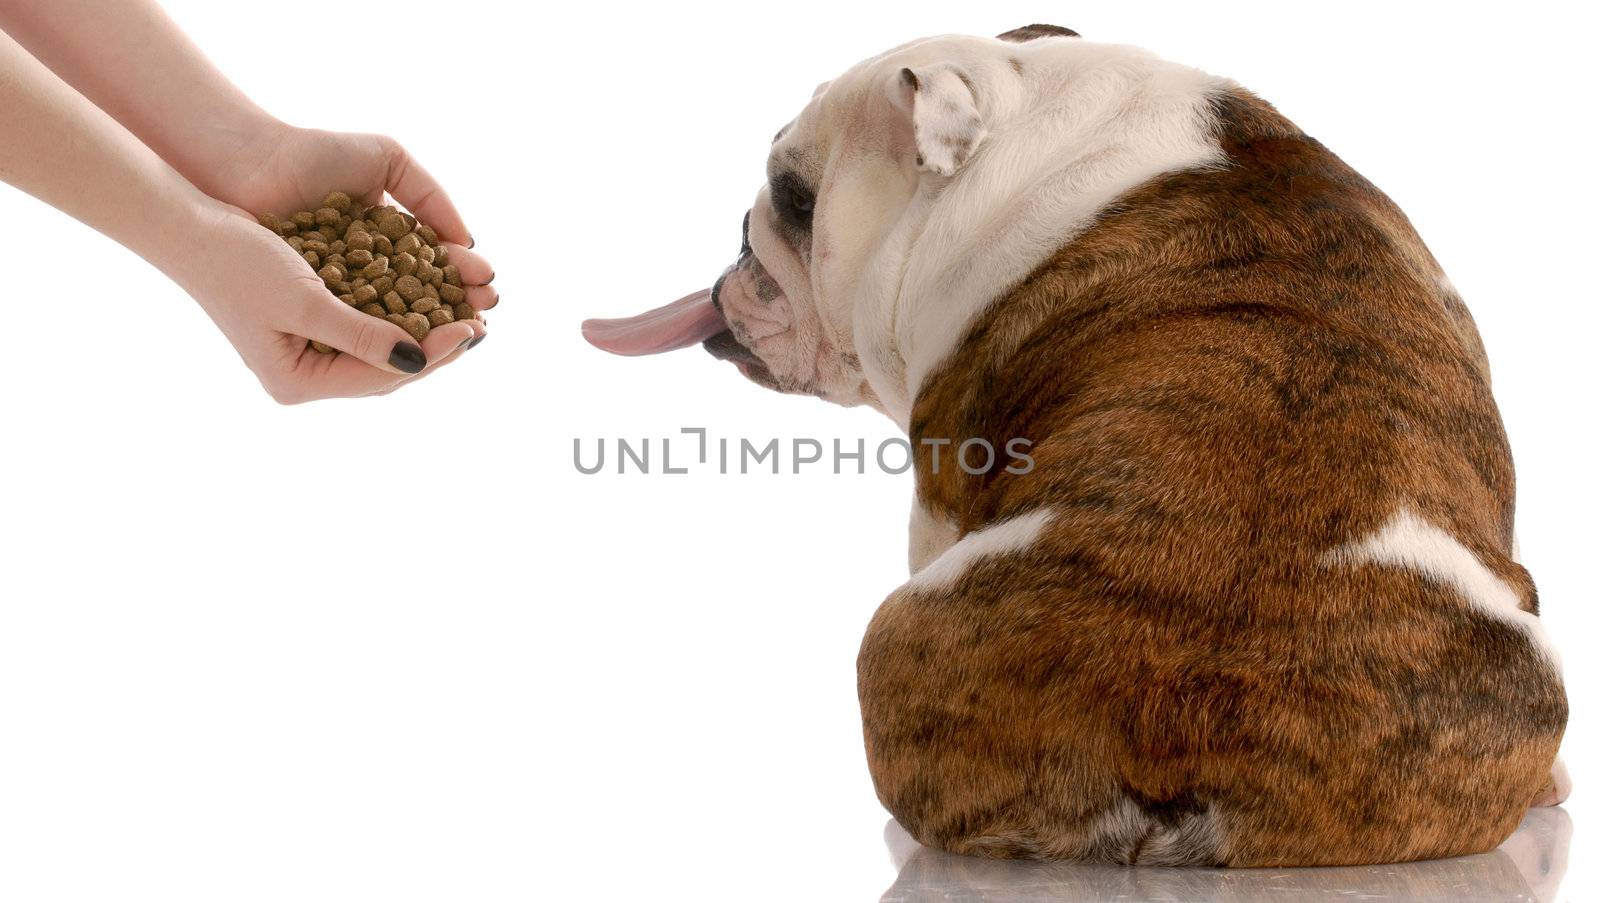 english bulldog refusing to eat food that is offered